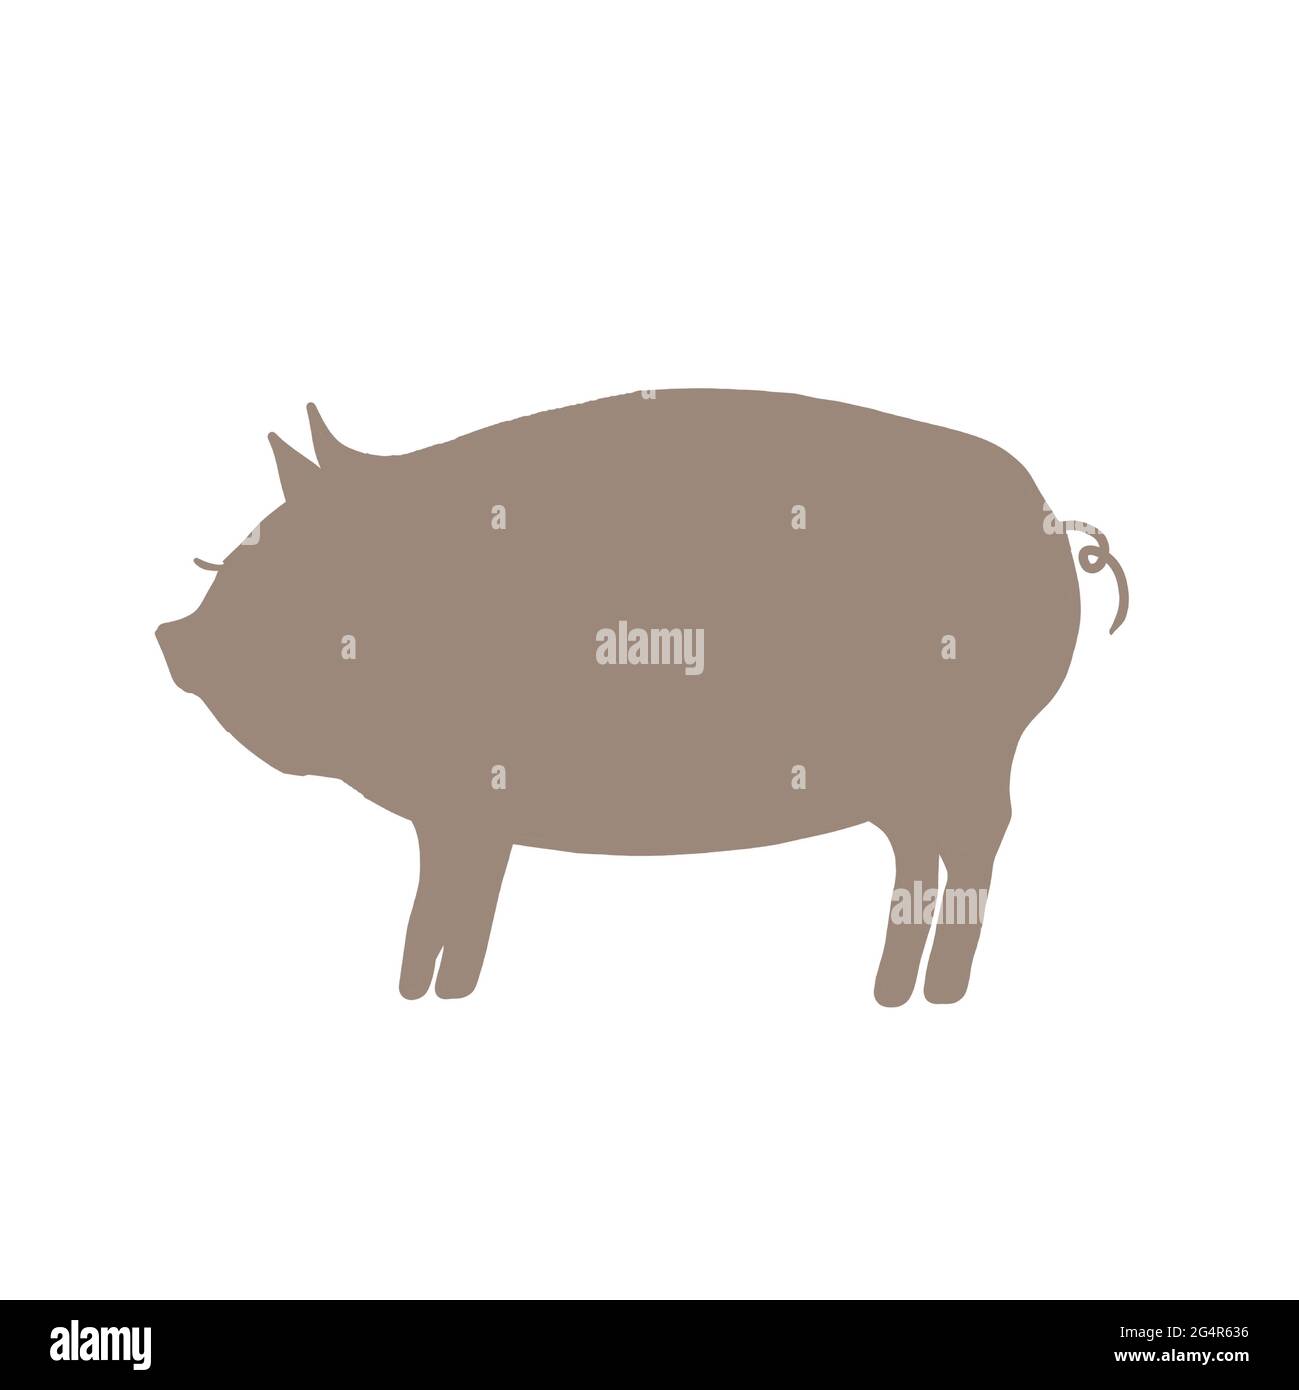 Pig silhouette. On a white background. Stock Photo